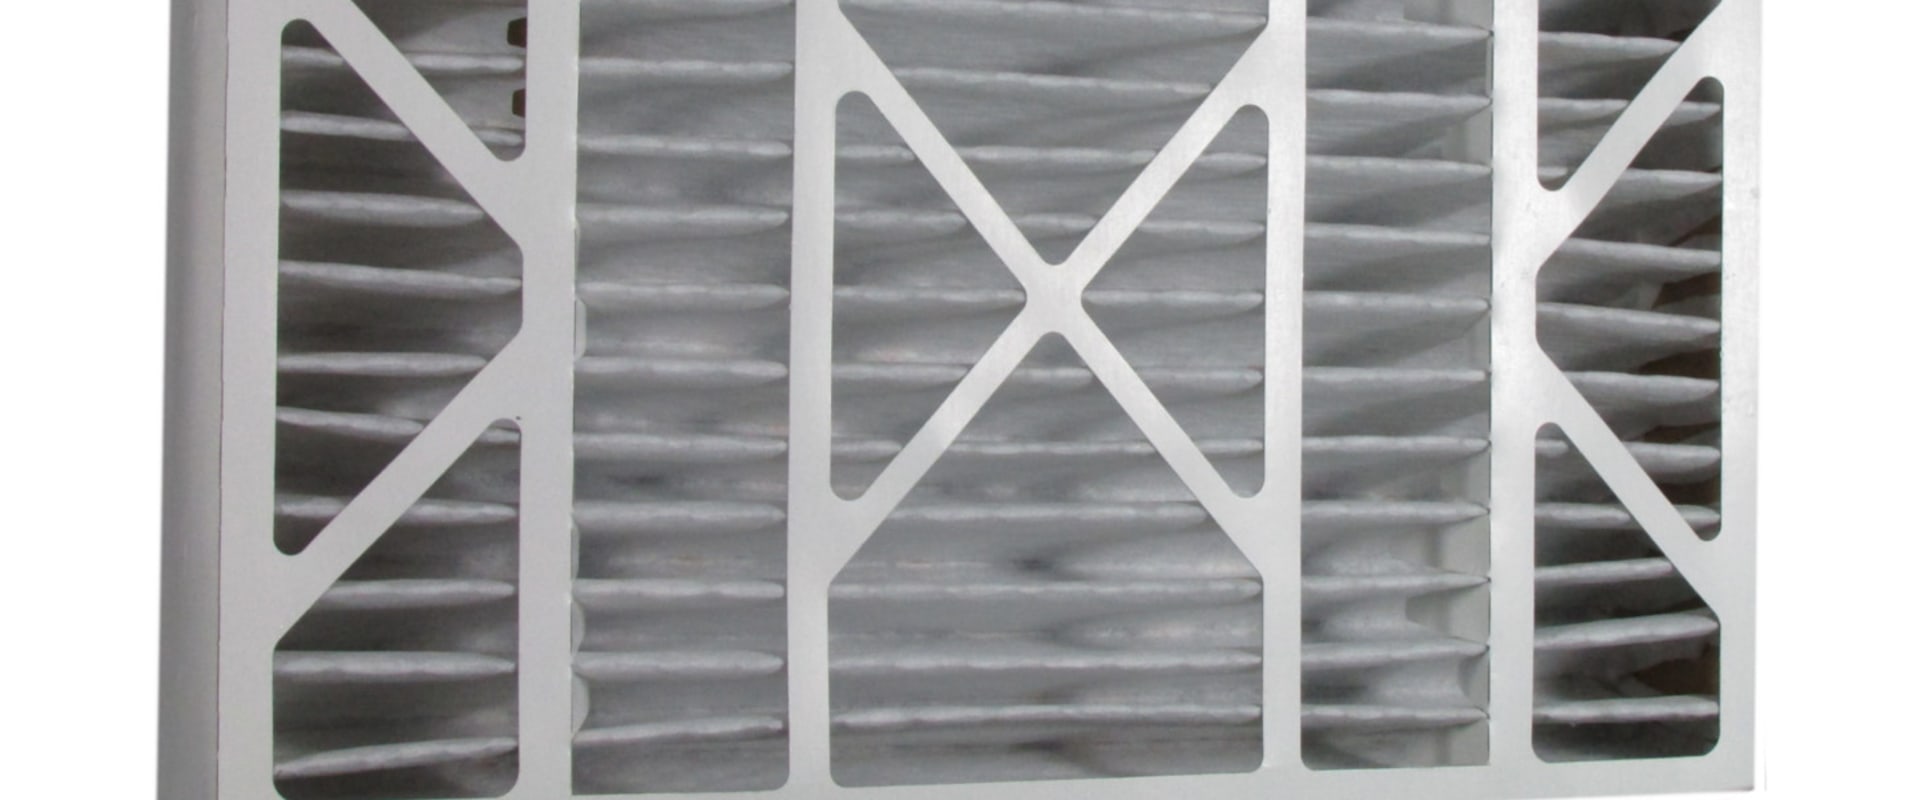 What You Need to Know About Honeywell 20x30x1 Air Filters